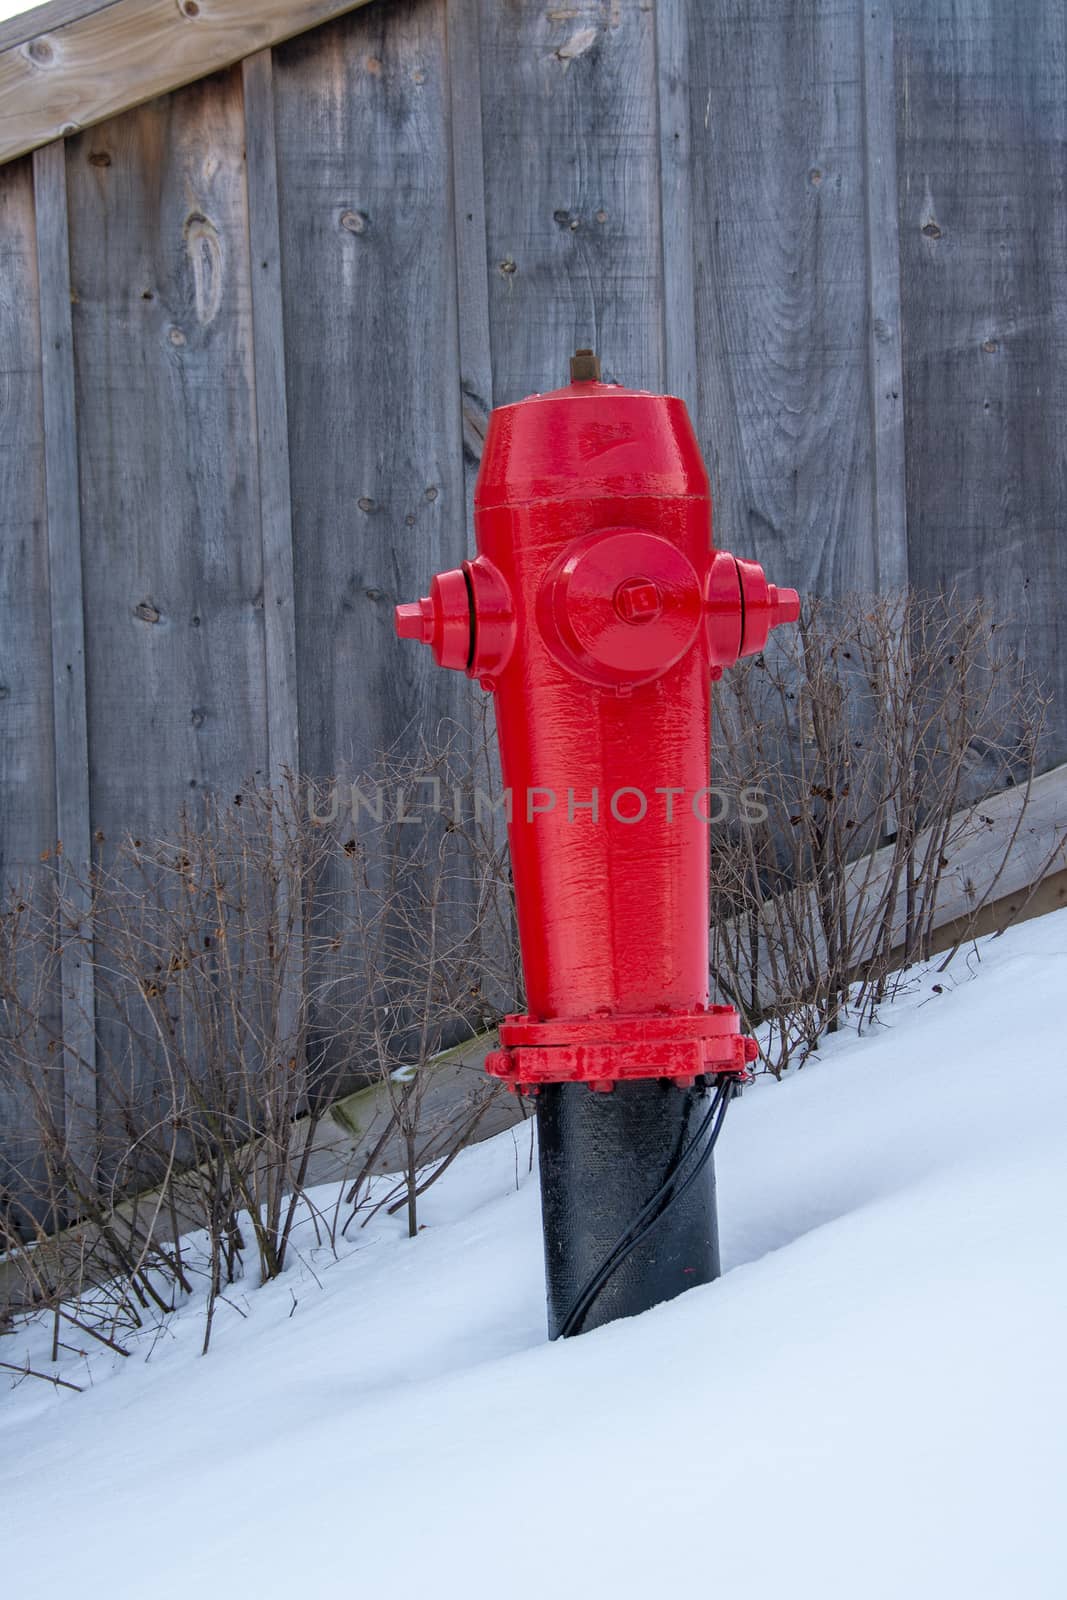 Fire hydrant near a wooden fence by ben44